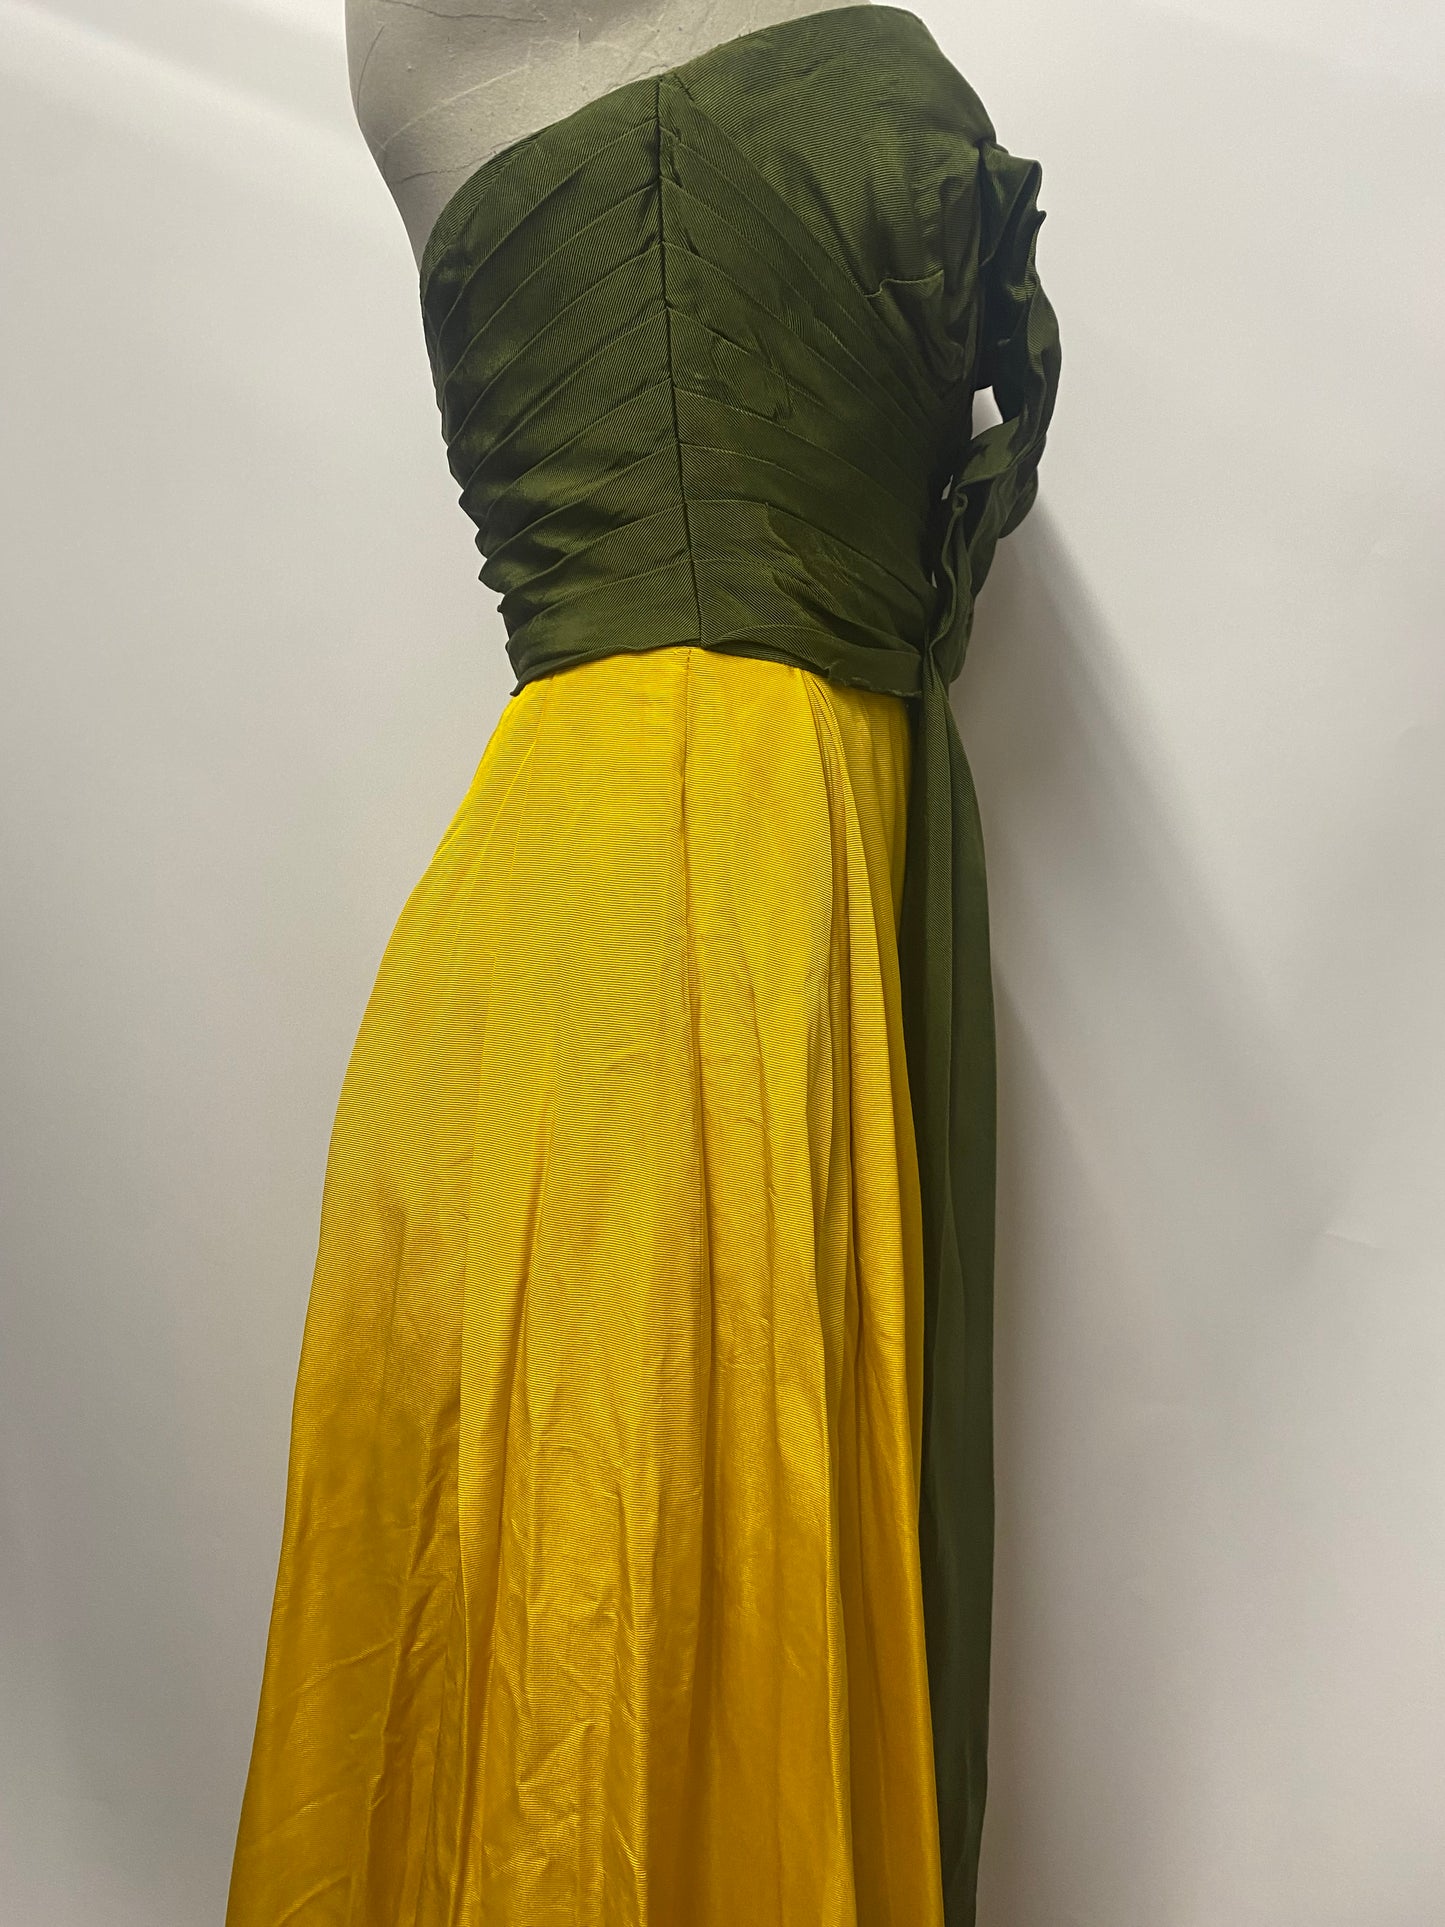 Dellwood Vintage Yellow and Green Strapless Dress Occasion Dress Small